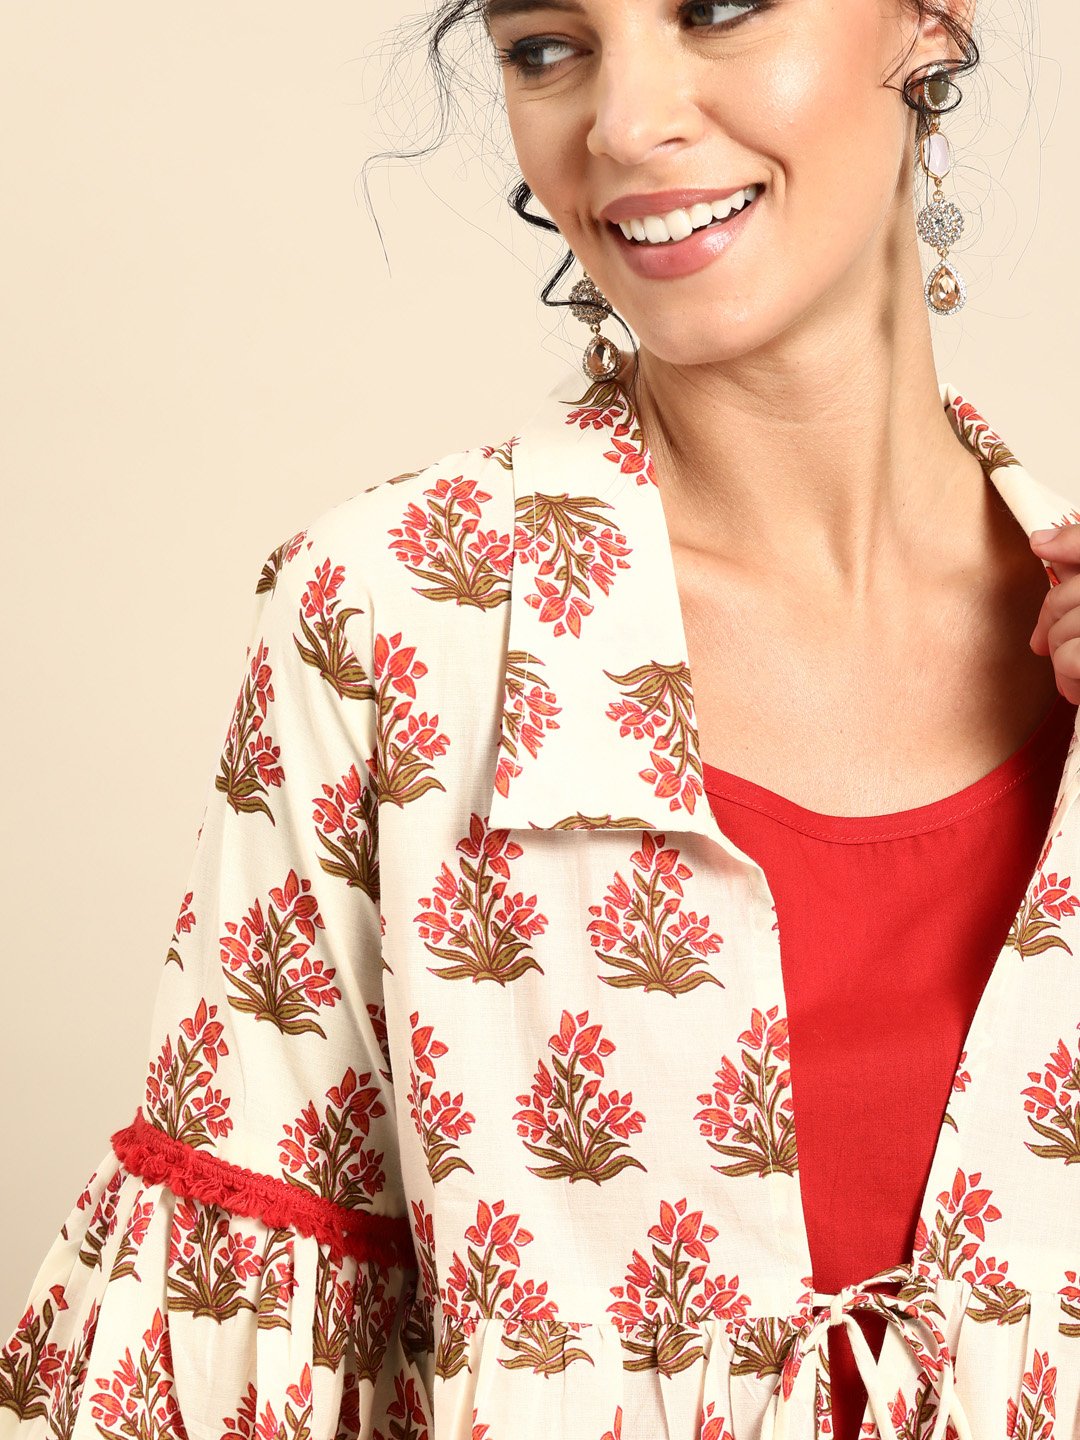 Women's Nayo Red Calf Length Three-Quarter Sleeves Straight Floral Printed Cotton Kurta With Jacket - Nayo Clothing